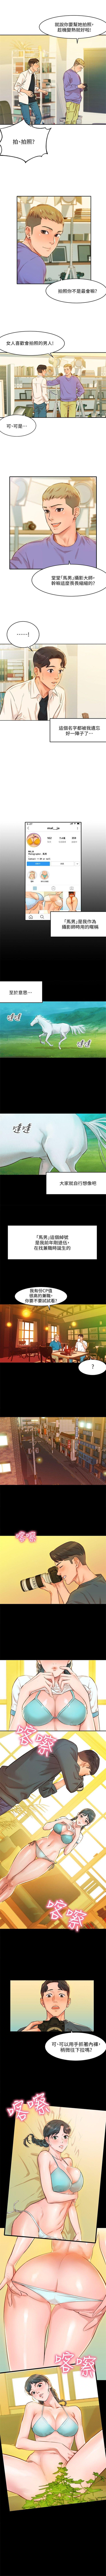 Beurette 女神寫真 1-21 官方中文（連載中） Pinoy - Page 4